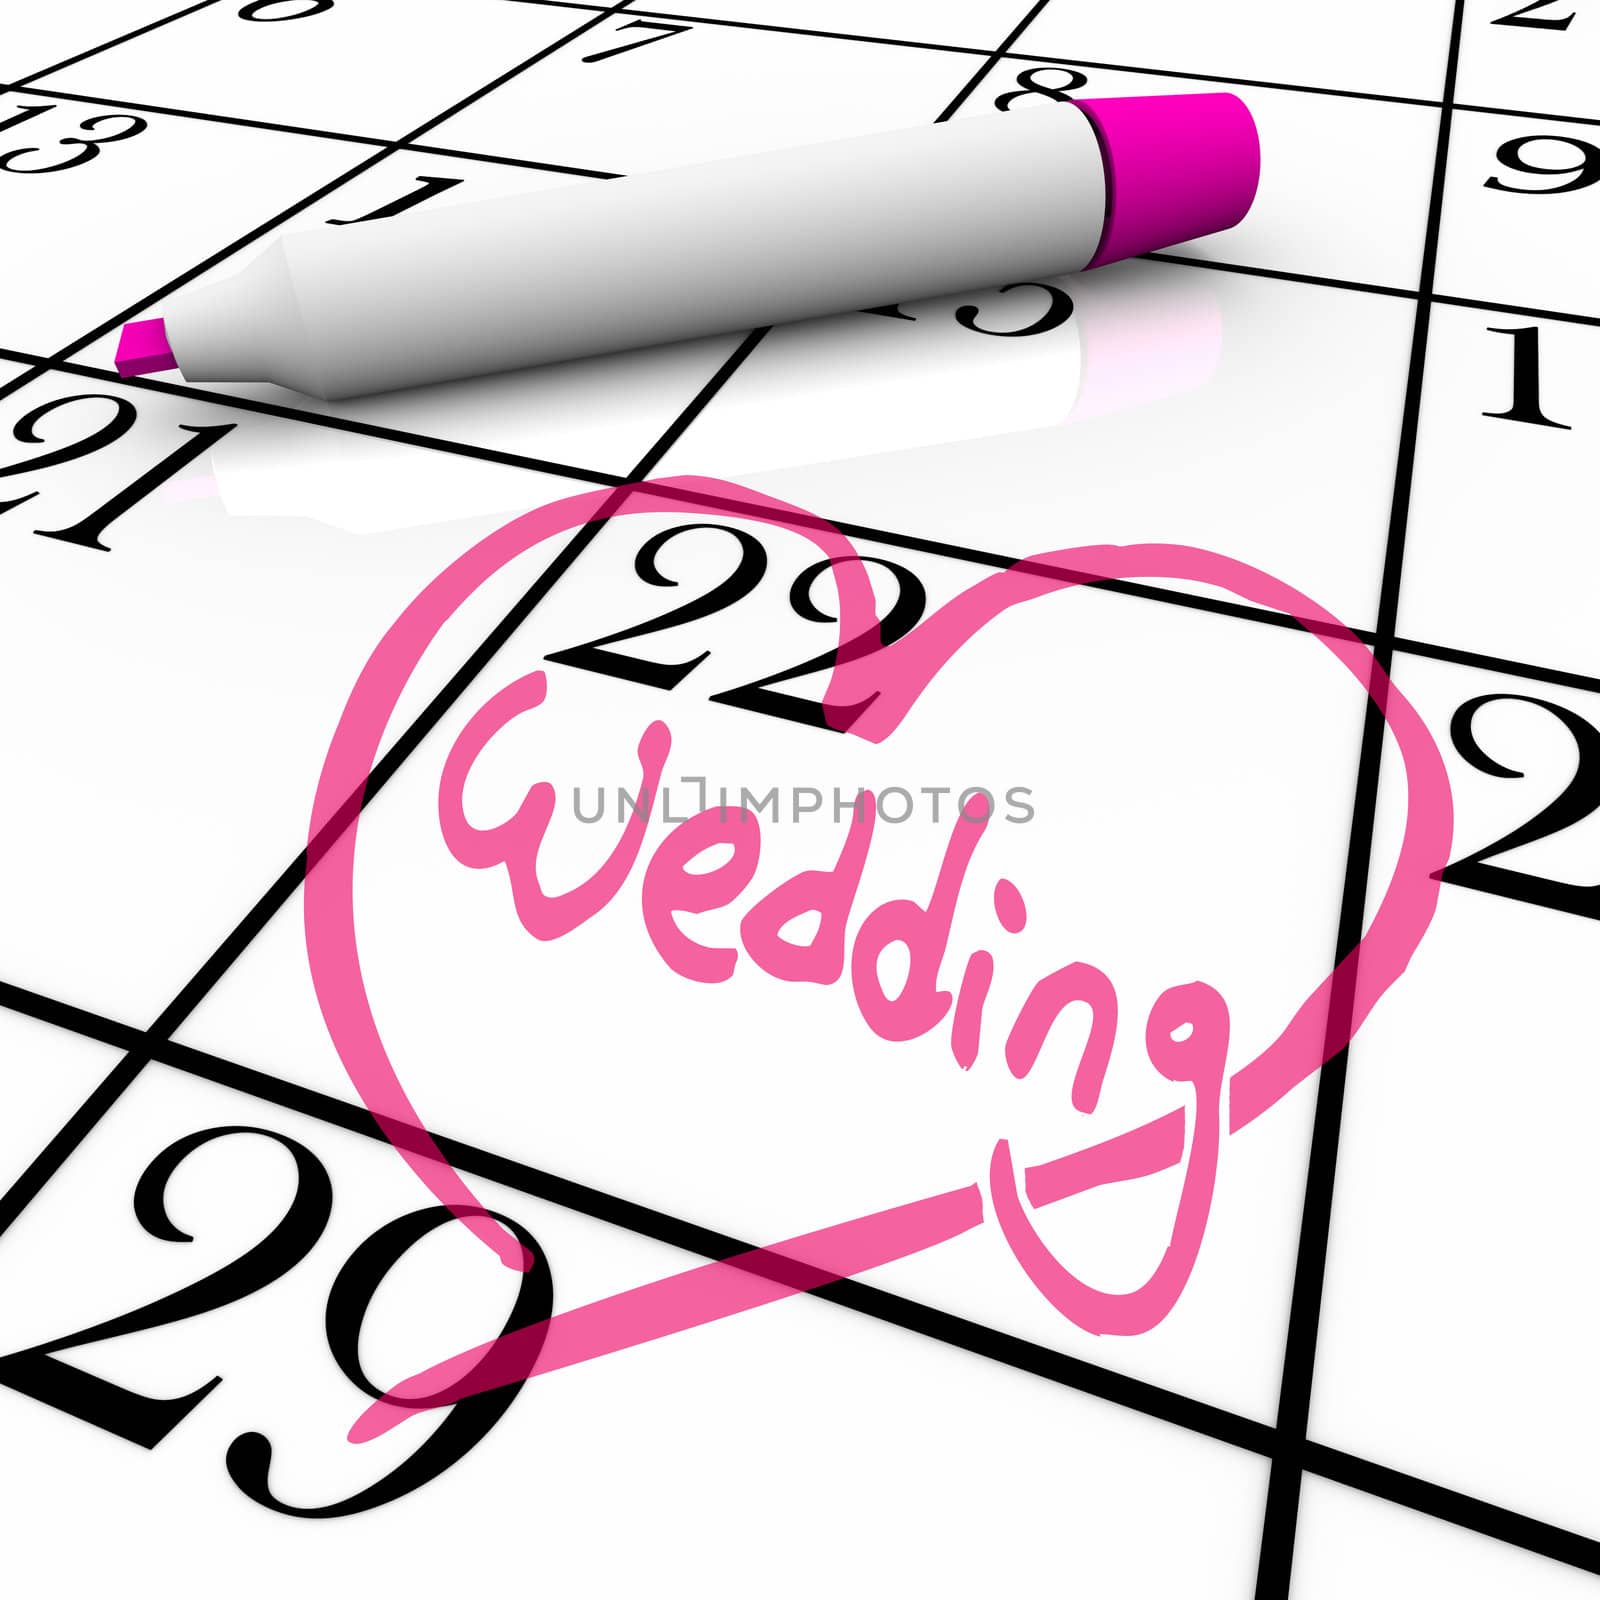 The date of a wedding is circled on a white calendar with a magenta colored marker, surrounded by a drawn heart